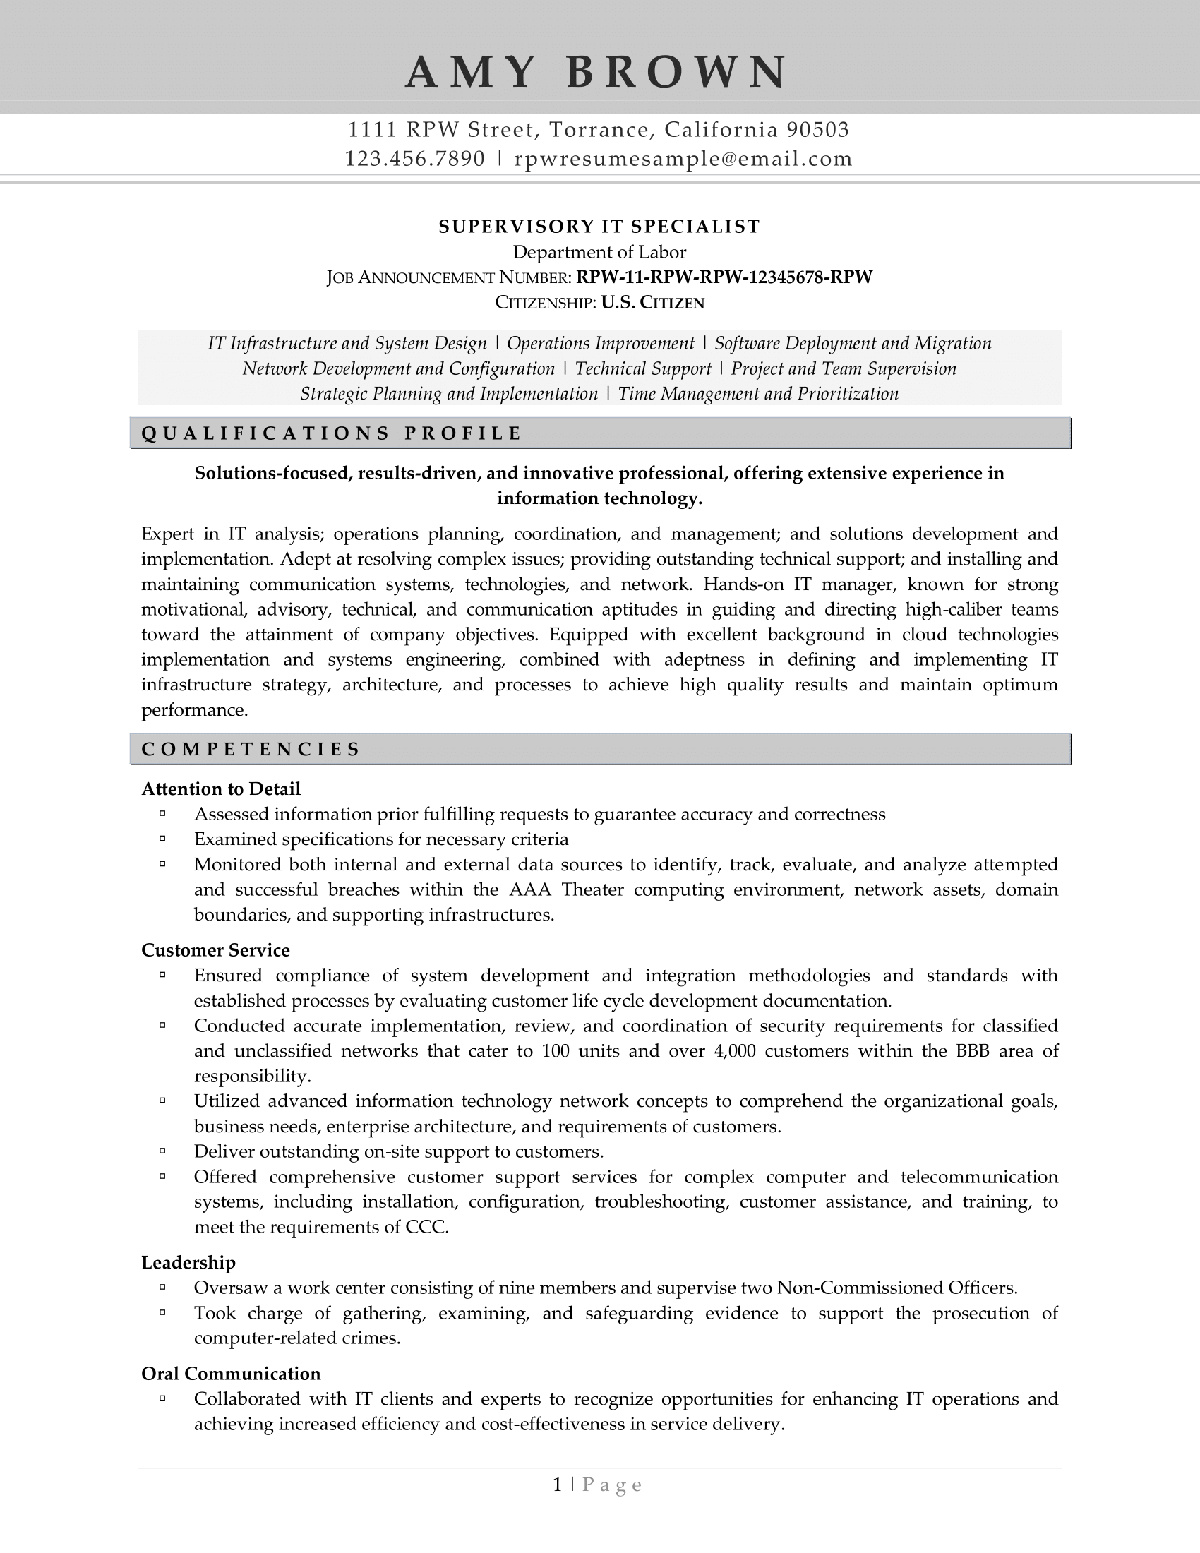 Information Technology Federal Resume Example Page 1